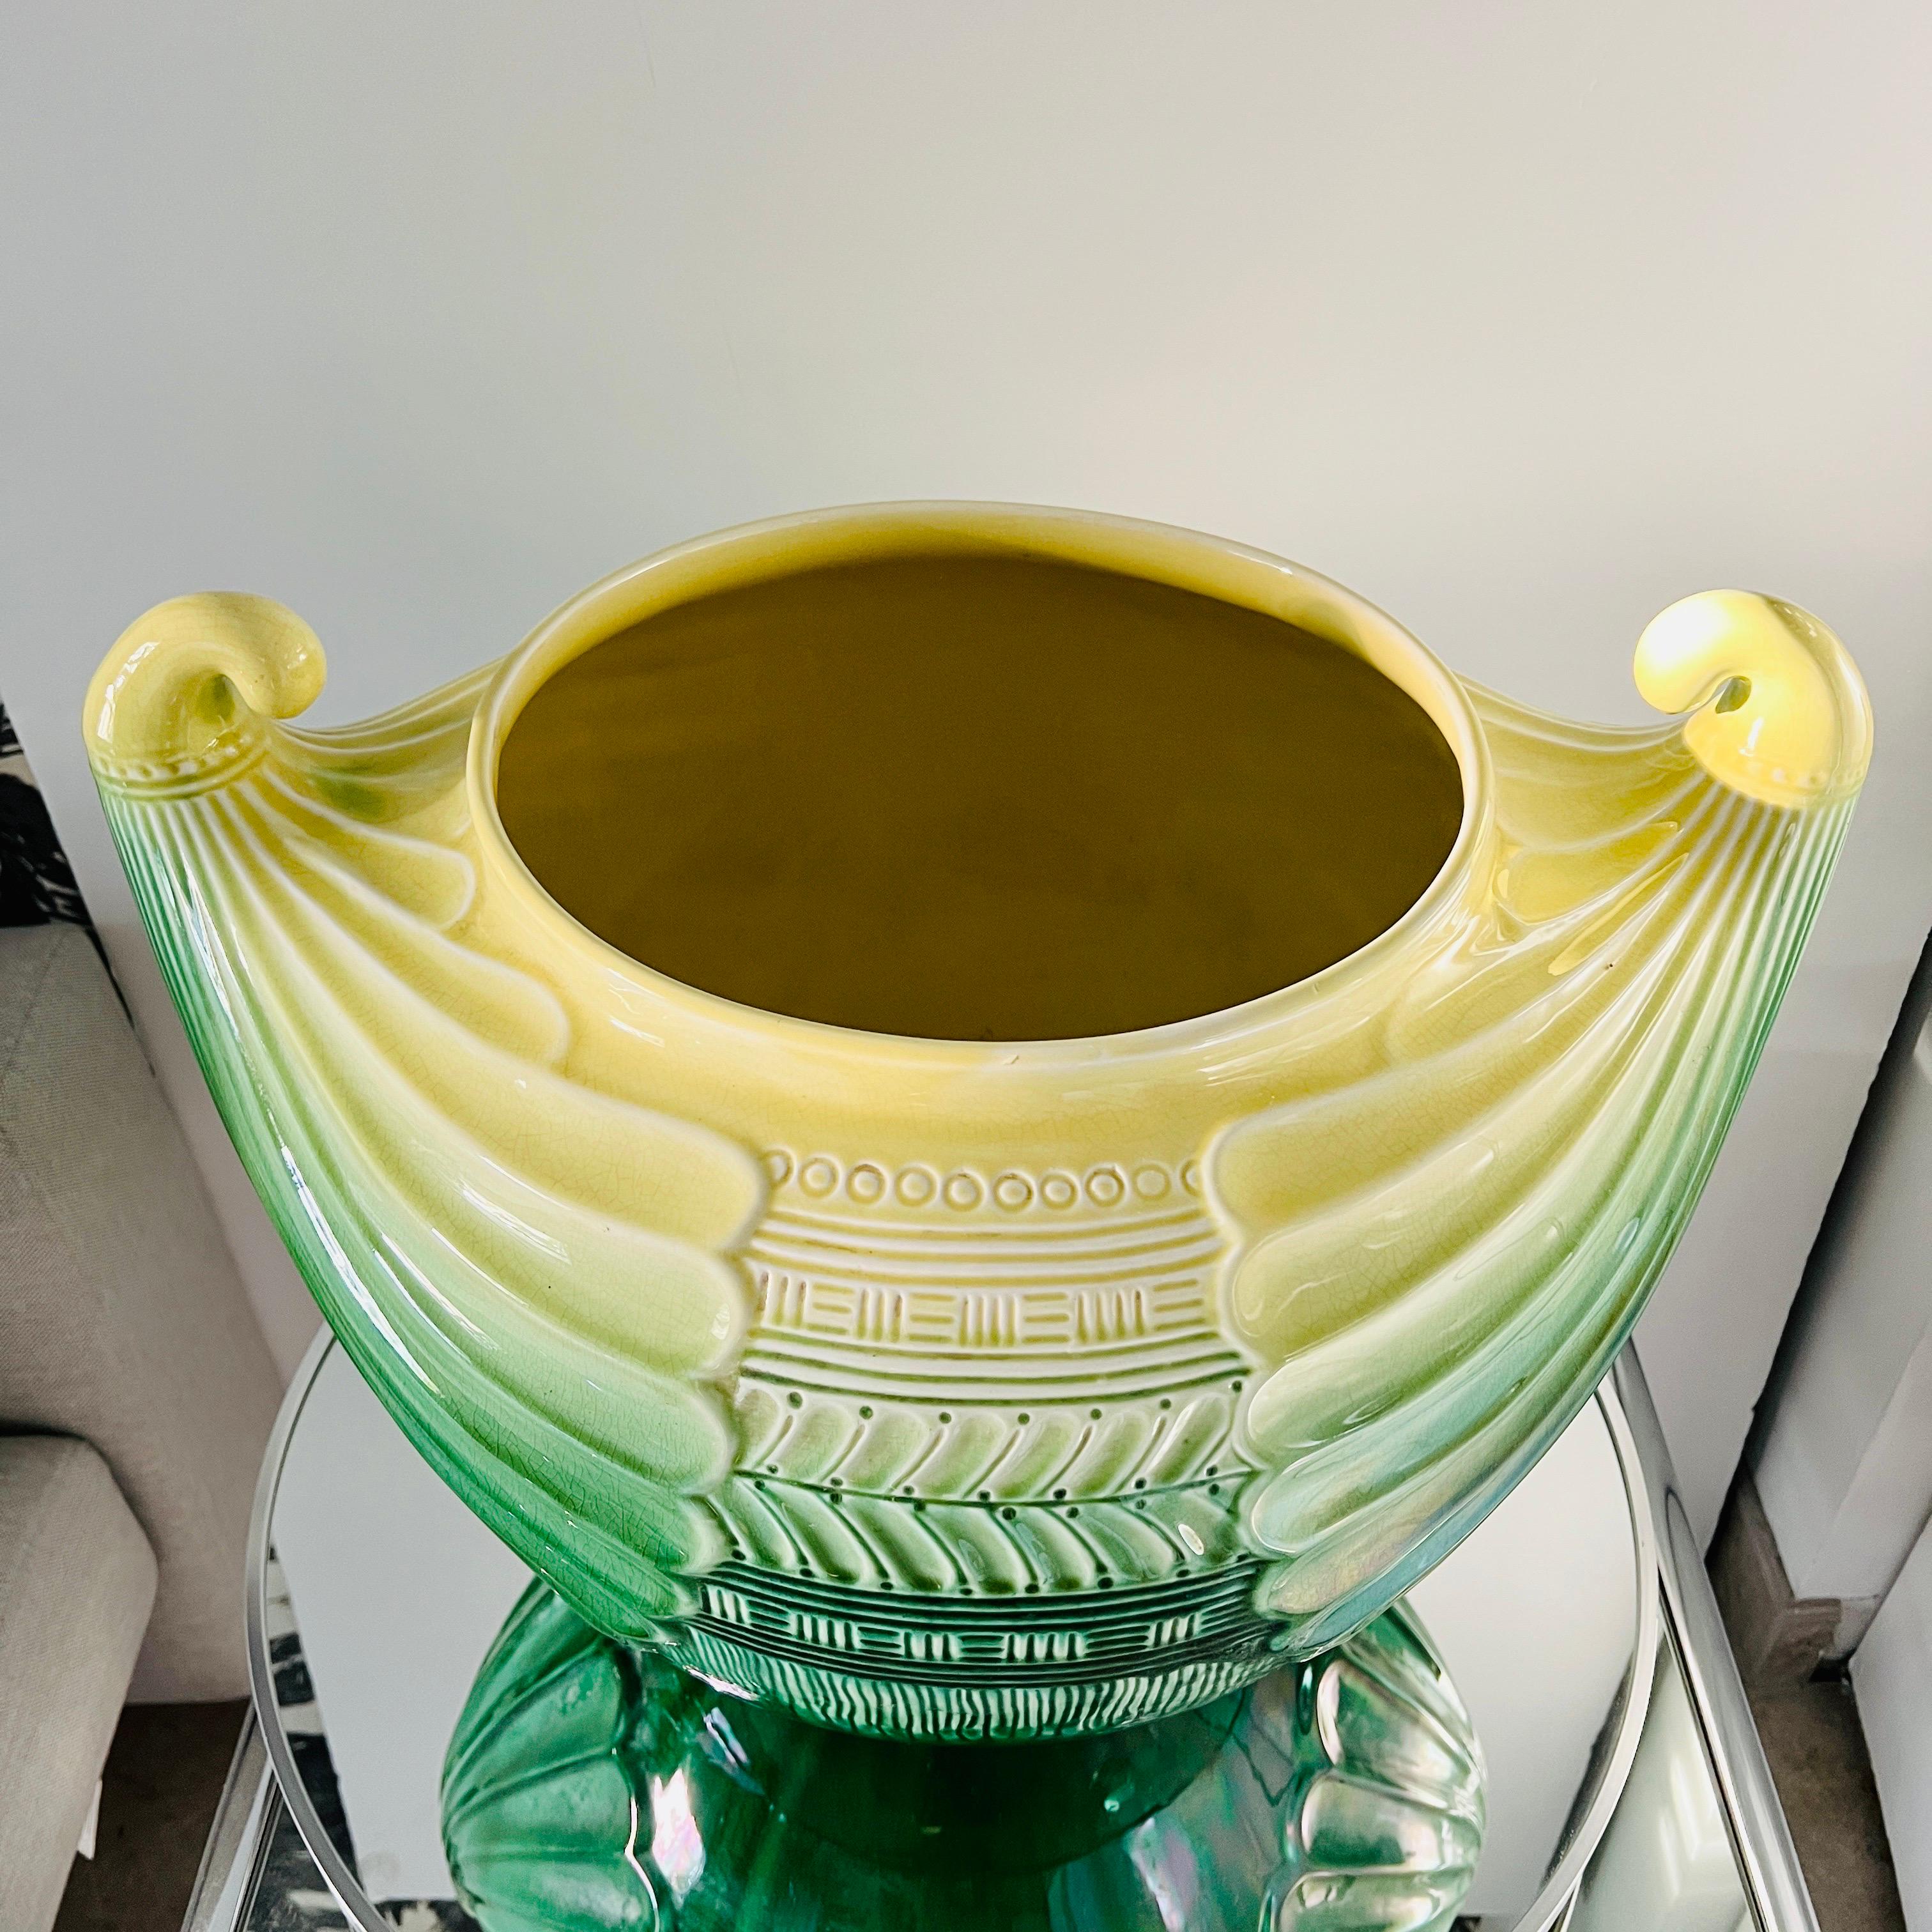 Early 20th Century Art Nouveau Ceramic Cachepot in Green and Yellow by SCI Laveno, Italy c. 1910